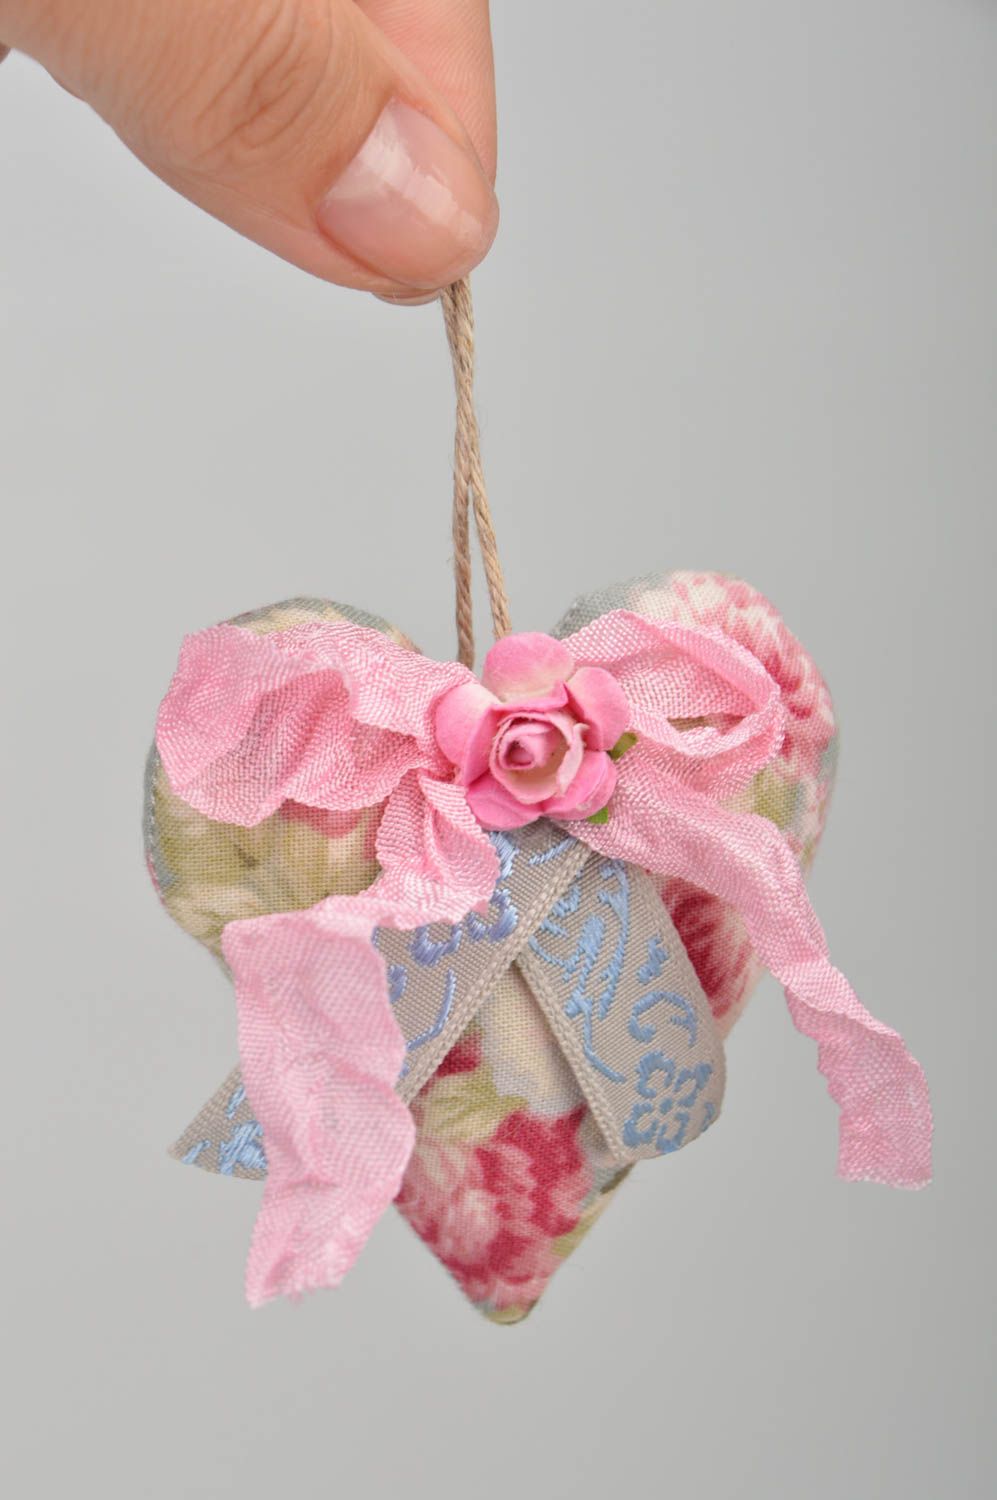 Handmade designer interior wall hanging fabric soft heart toy with rose and bow photo 3